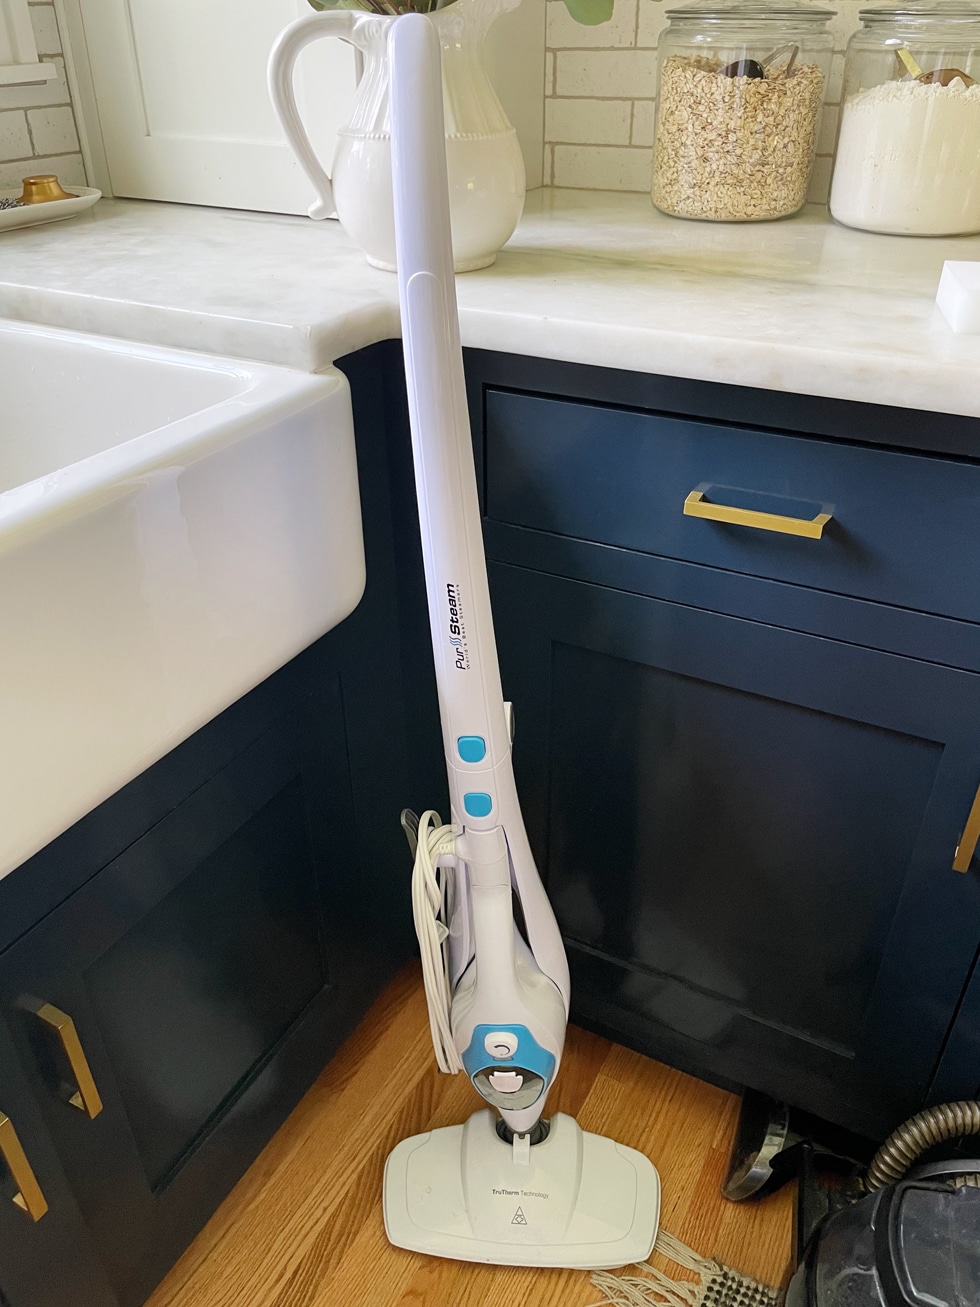 My 10 Favorite Cleaning Tools, Gadgets and HacksThat Make Life Easier!